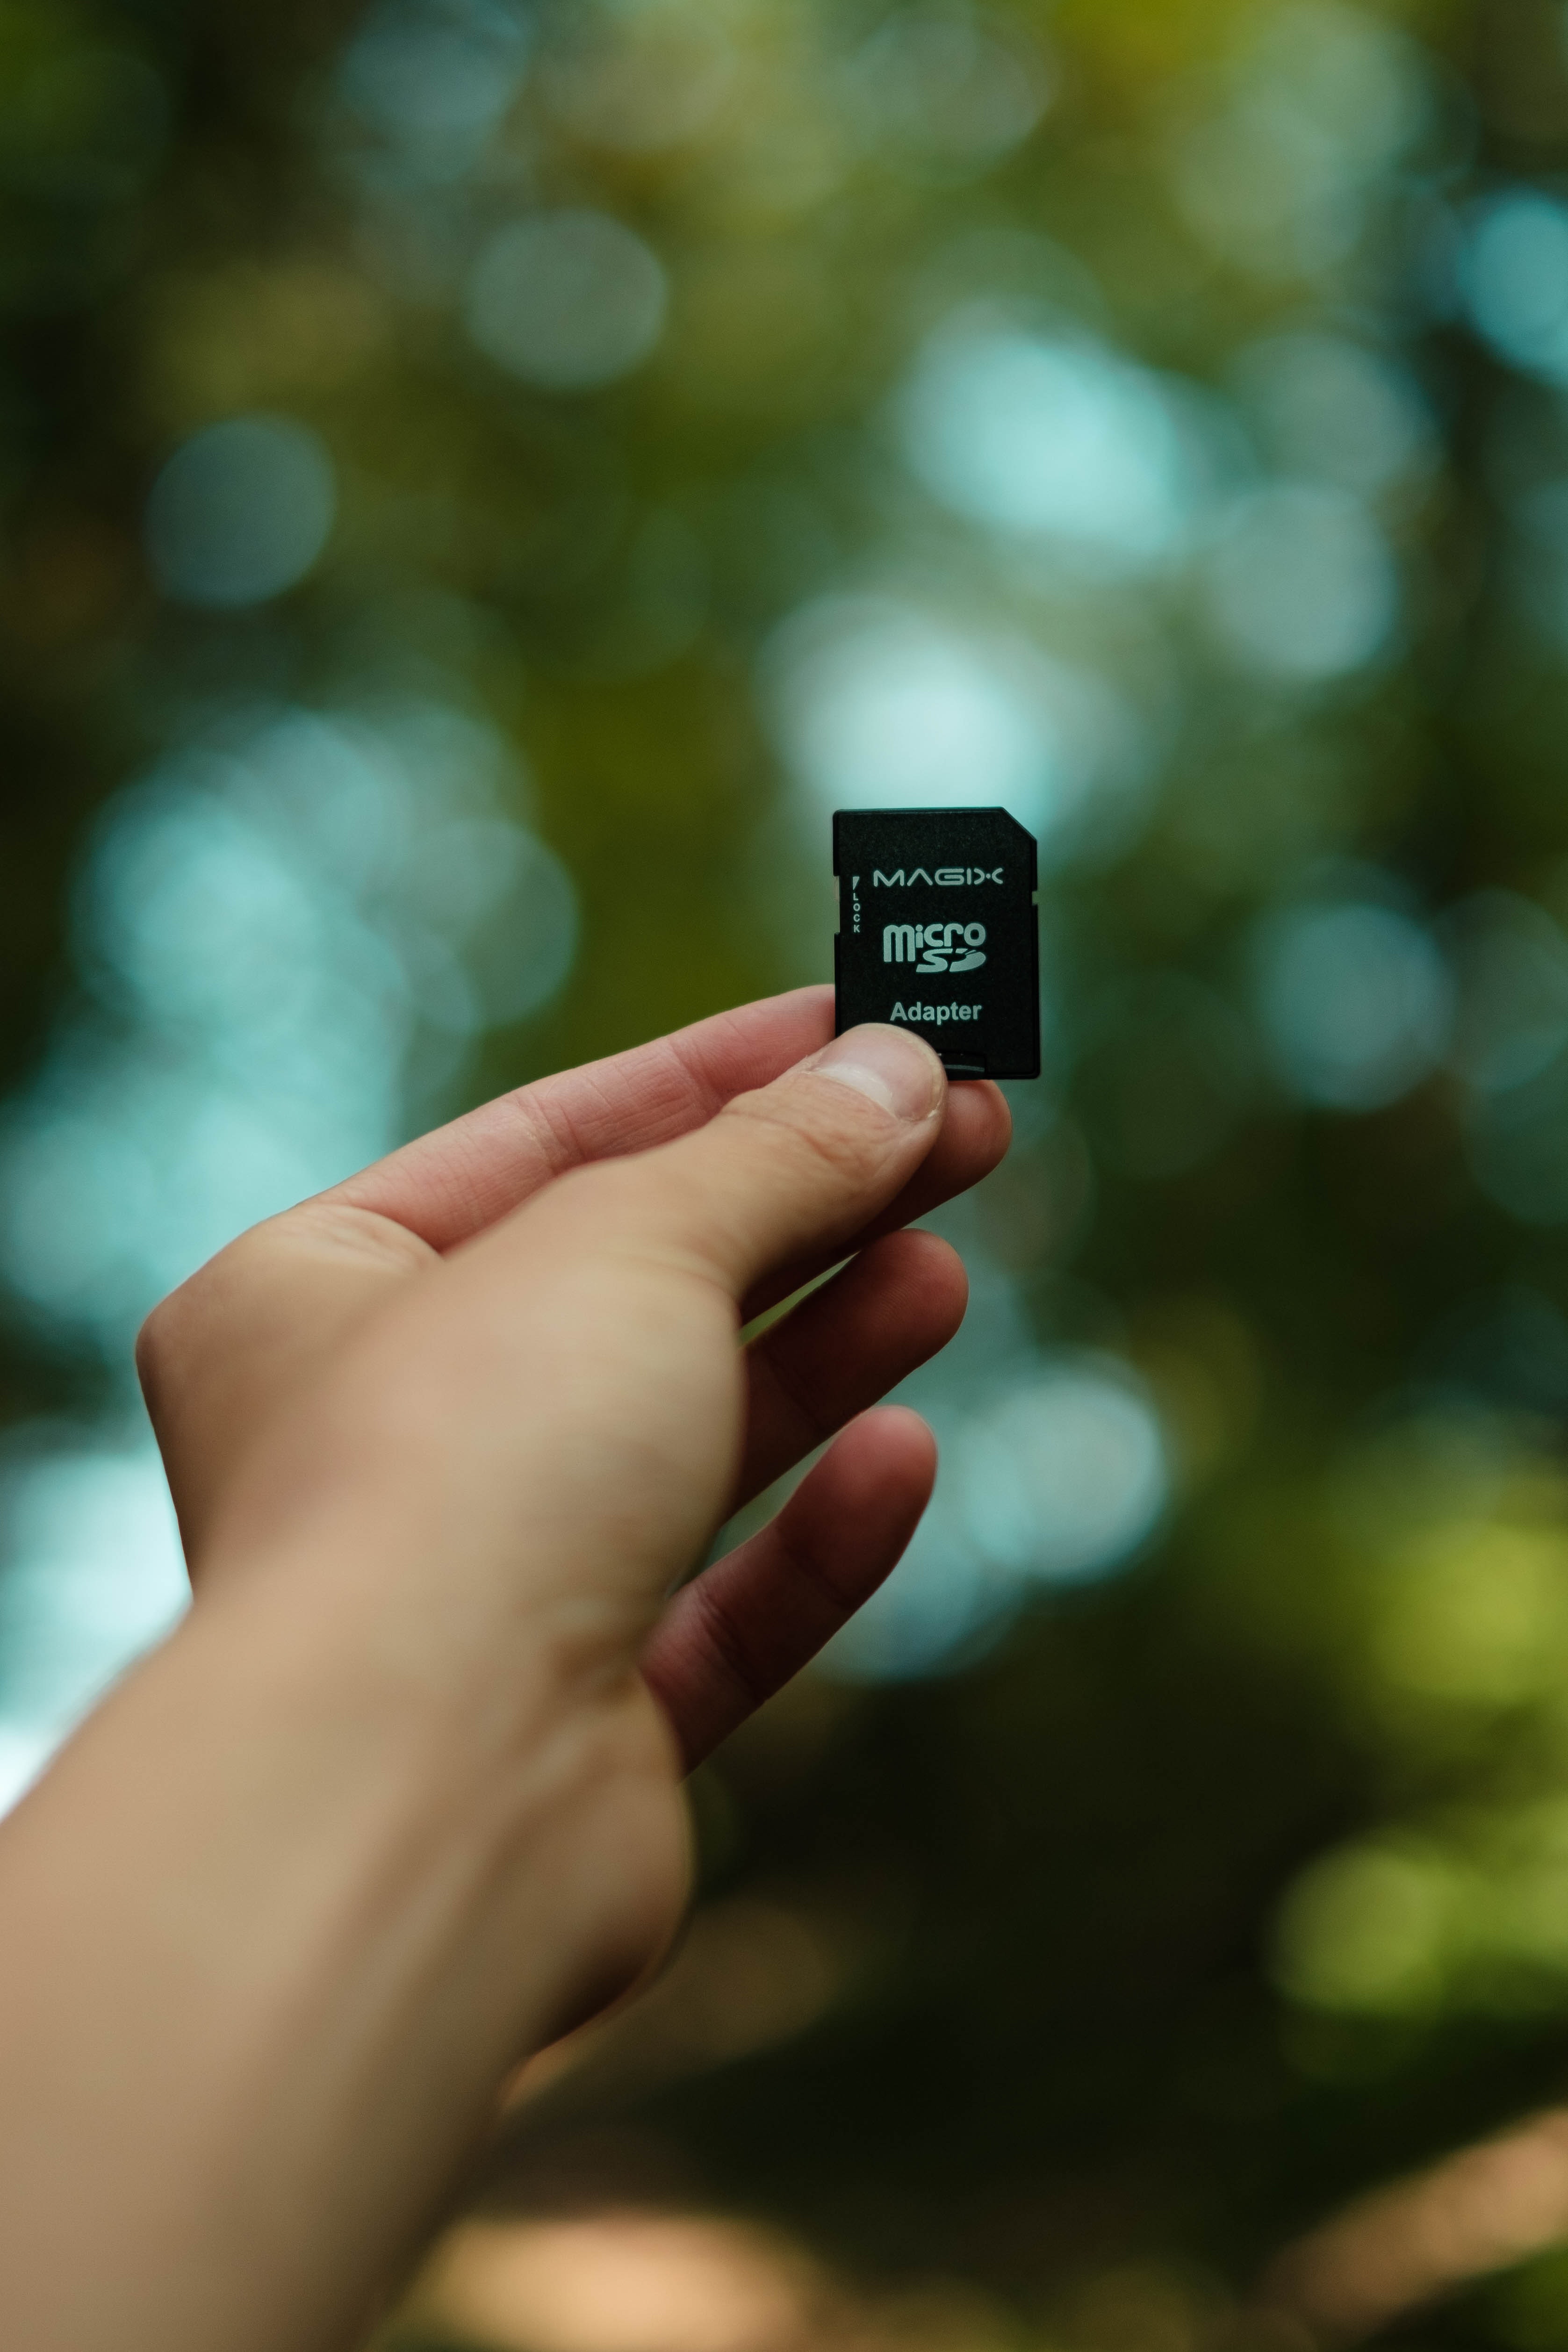 holding-sd-card